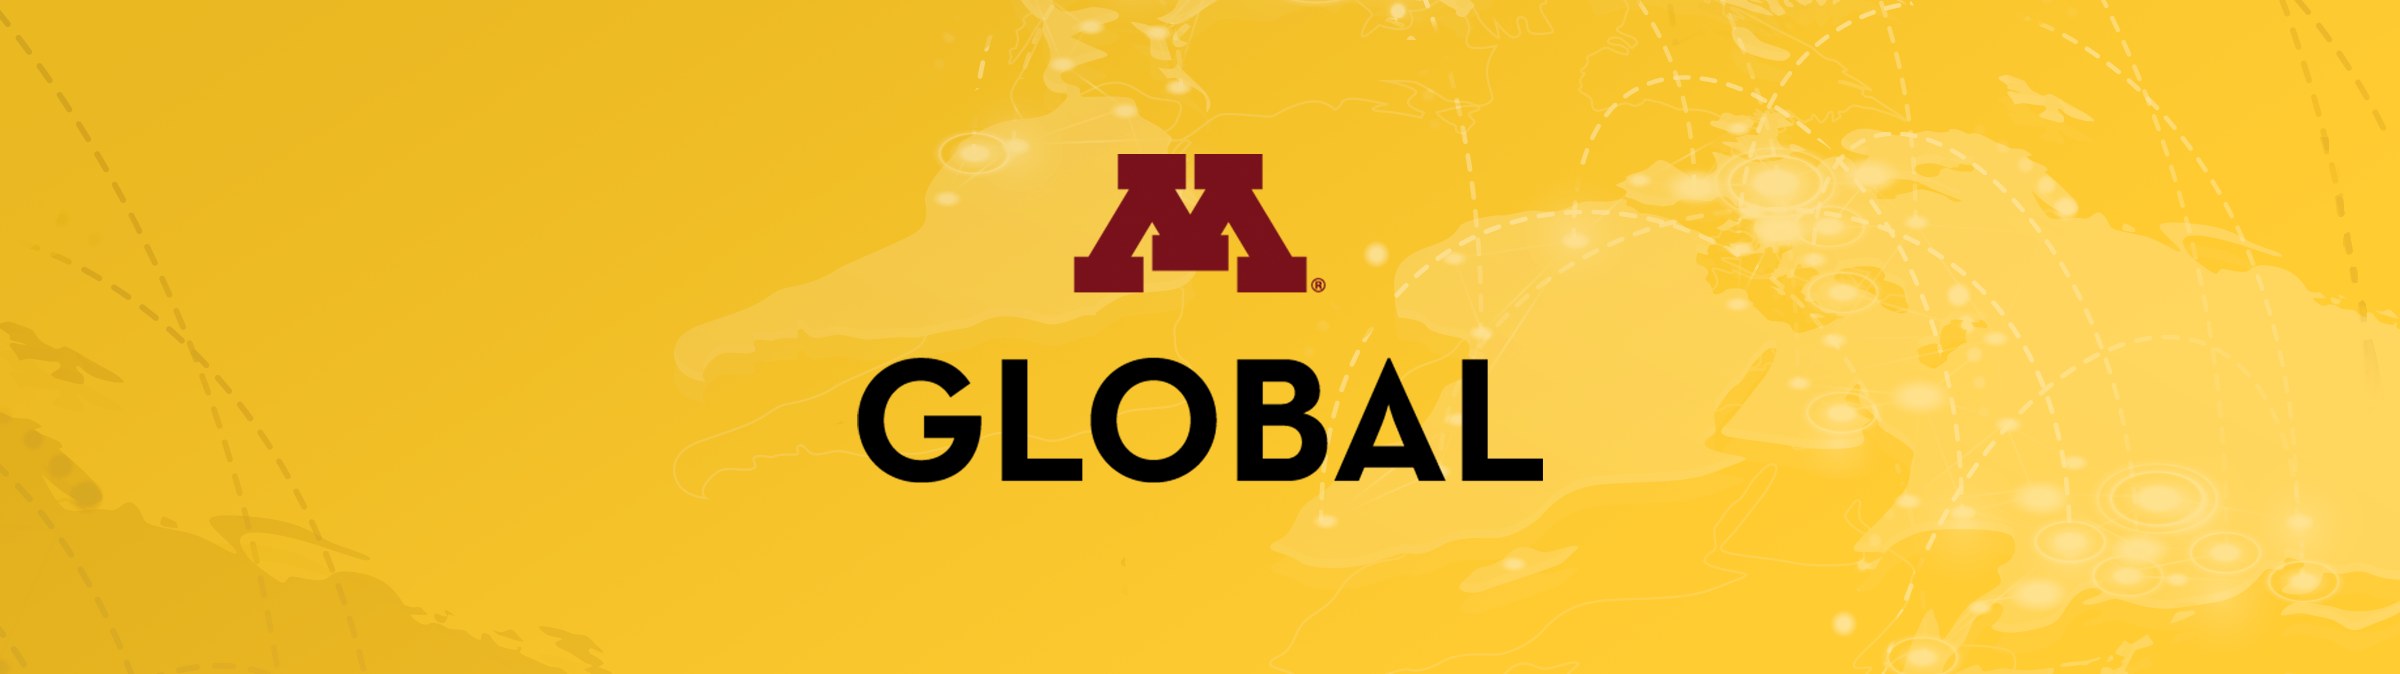 gold box with globe and country pattern and M Global logo with the maroon UMN block M and the nword global